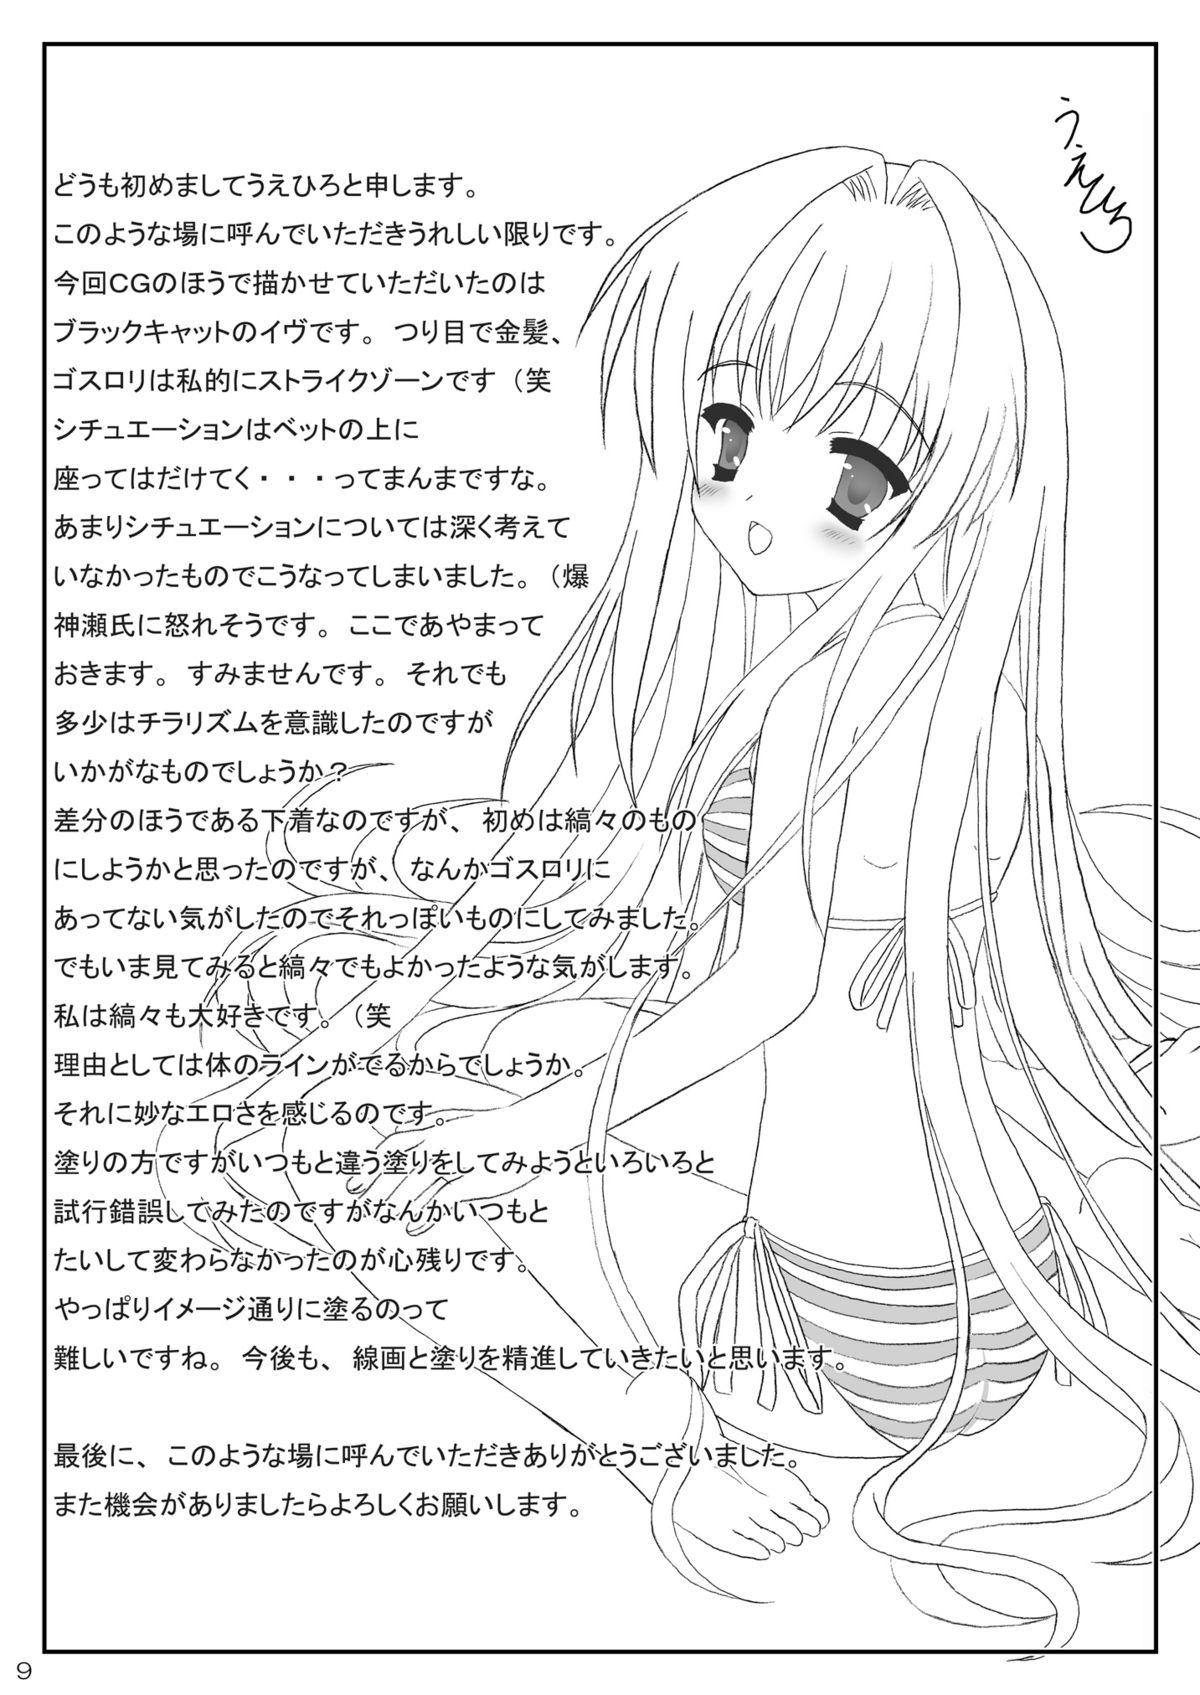 Male Situation Maniacs vol.0.5 Omake Hon - Fate stay night Prostituta - Page 14